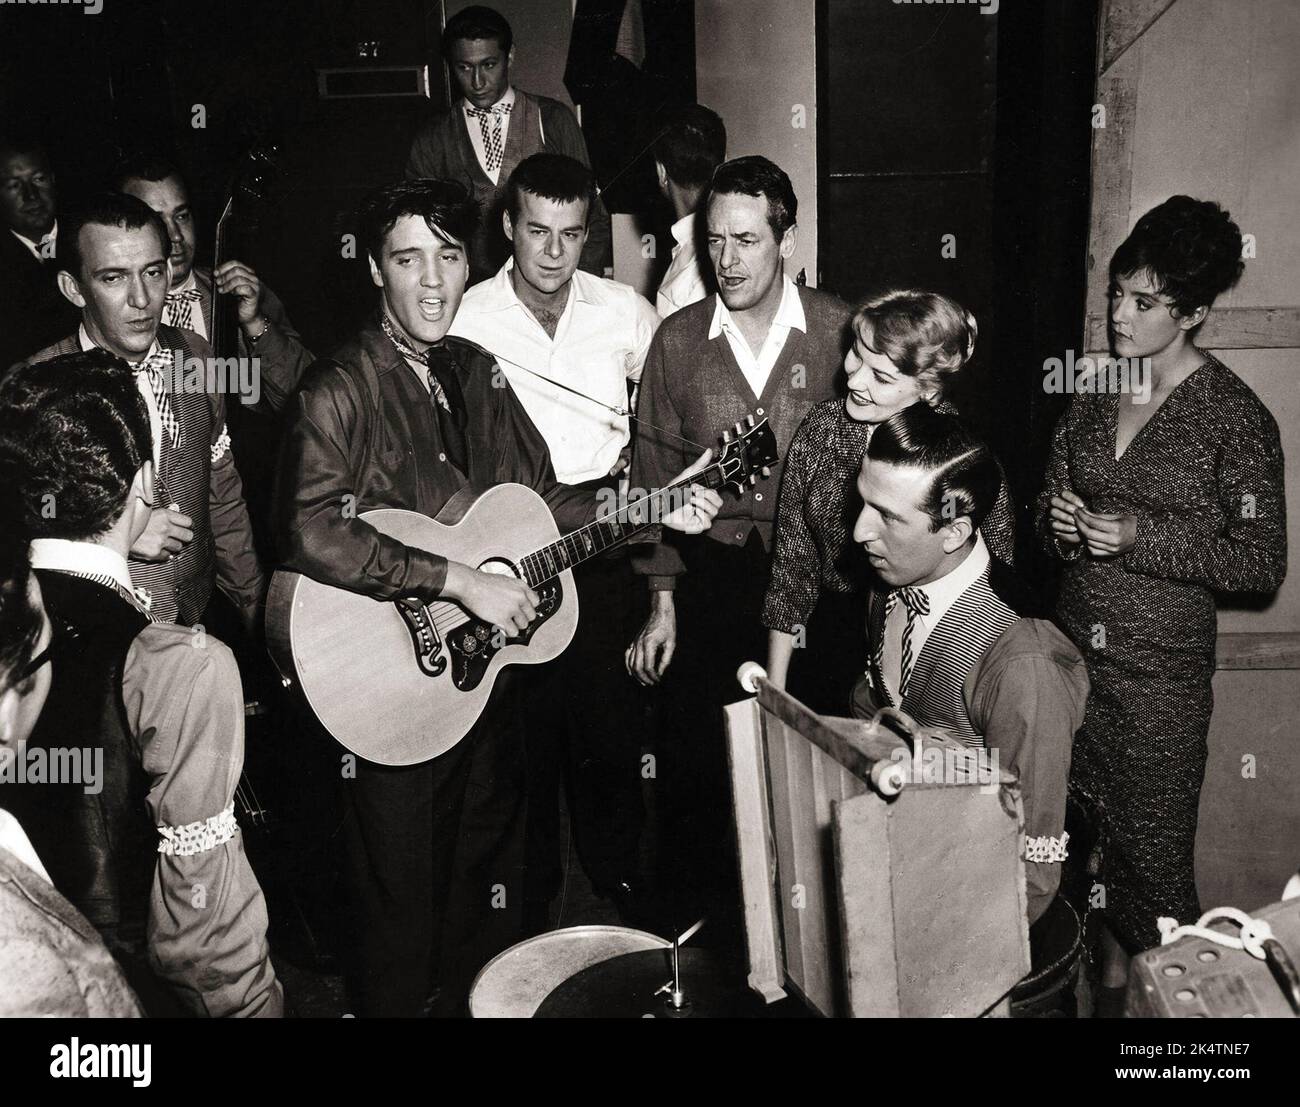 Hoyt Hawkins with (back to camera) takes part in a music number backstage with, Hugh Jarrett, Bill Black (holding upright bass), Elvis Presley, Scotty Moore at the top of picture, Ric Roman next to Elvis, Charles O'Curren, Patti Page, D.J. Fontana sat with his drum kit, and Liliane Montevecchi (Nina). Stock Photo